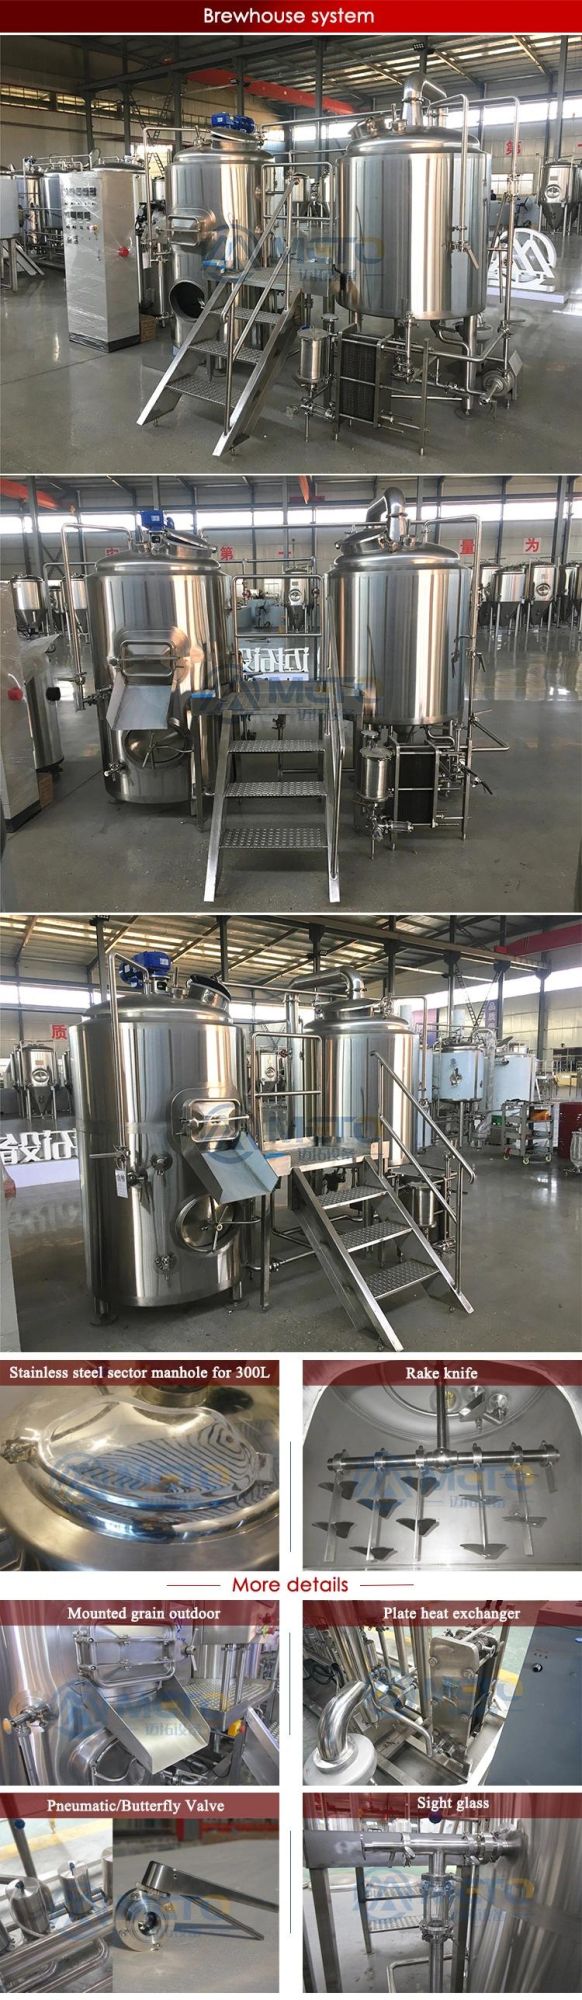 300L 2 Vessels SUS304 Micro Brewery Equipment for Beer Pub